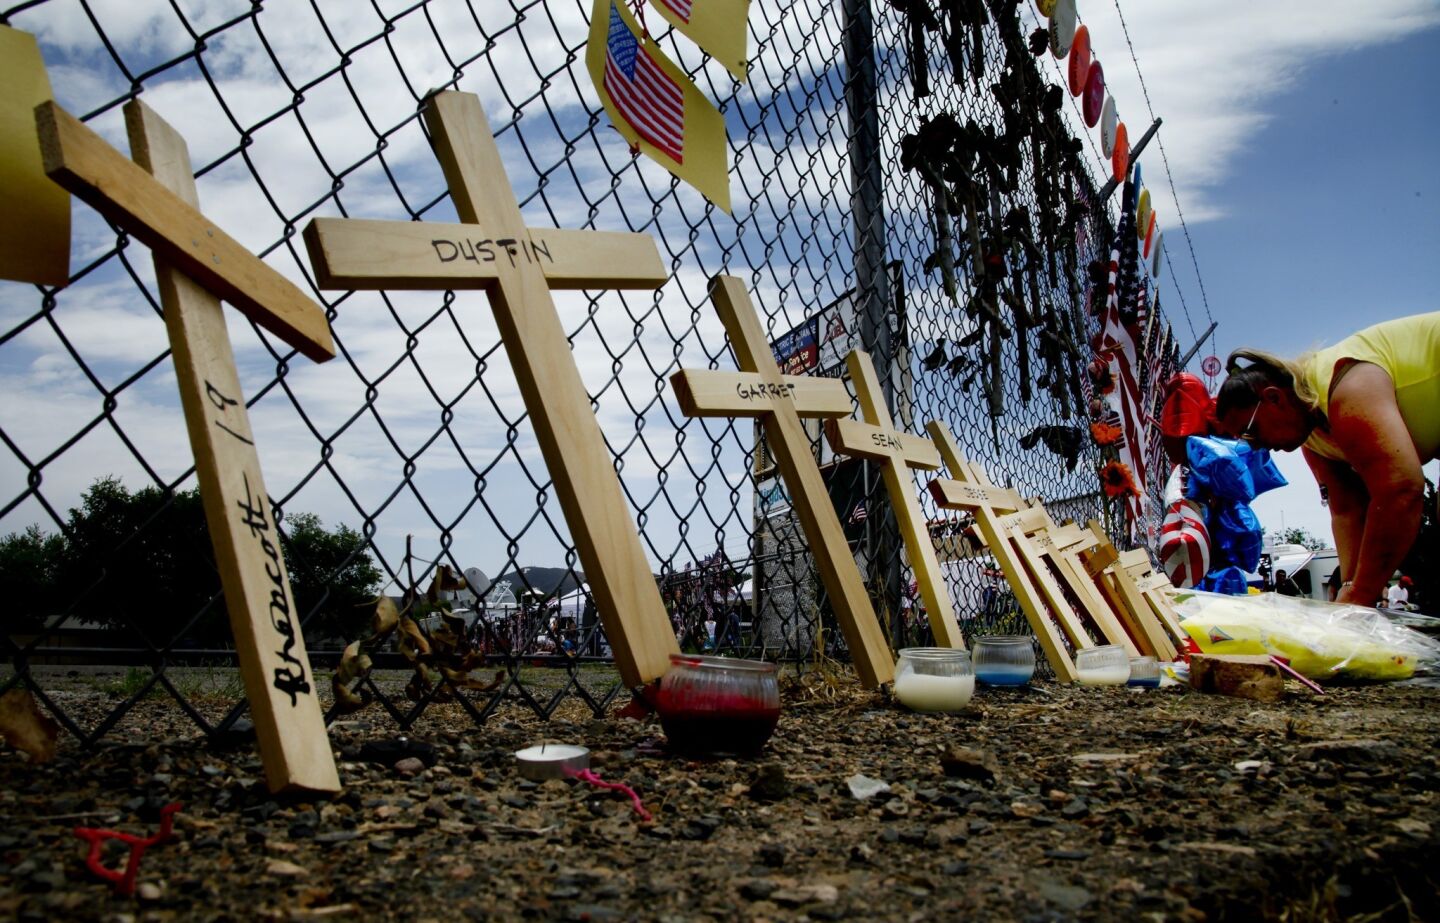 Nineteen crosses lean against the fence surrounding Fire Station 7.